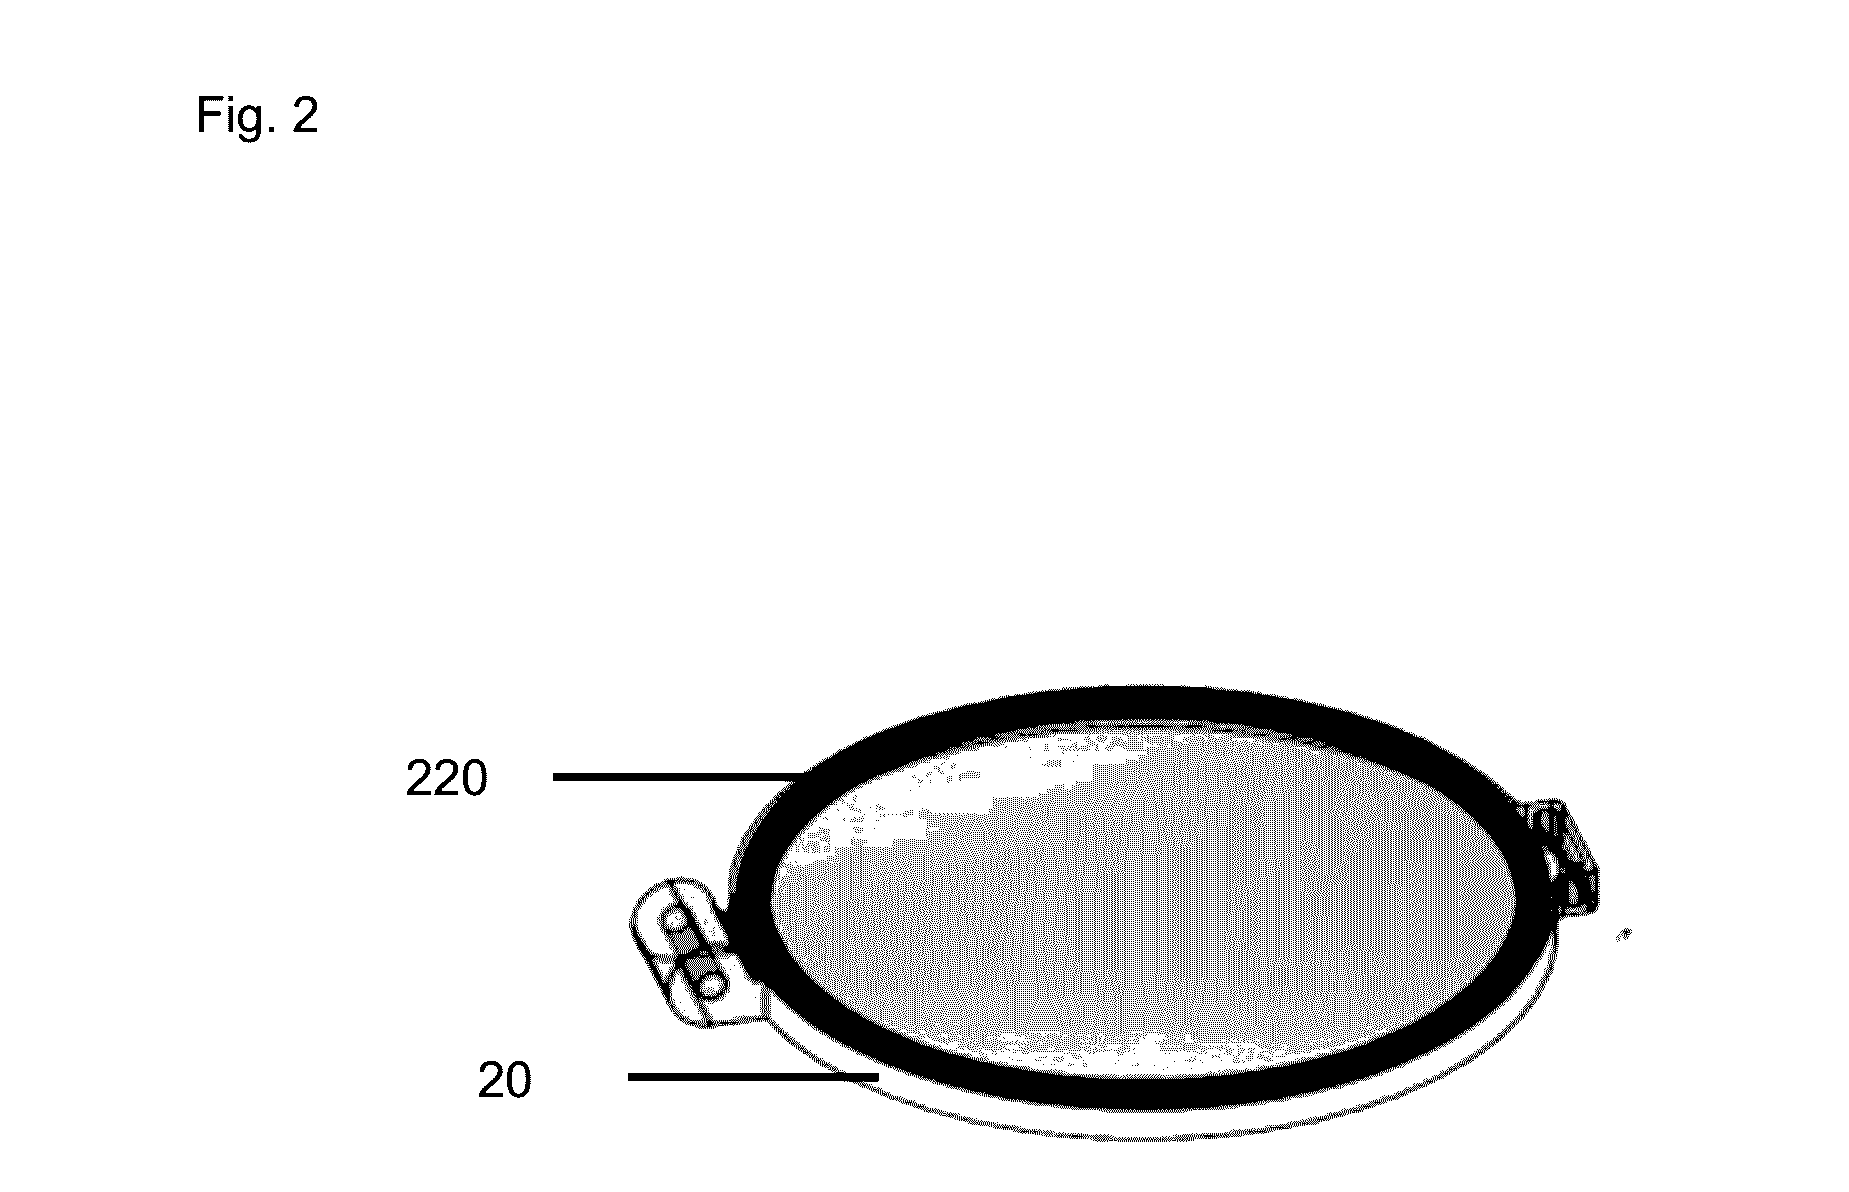 Apparatus with mobile reusable airtight container assembly utilizing pressurized gas to maintain freshness of roasted coffee beans or grounds